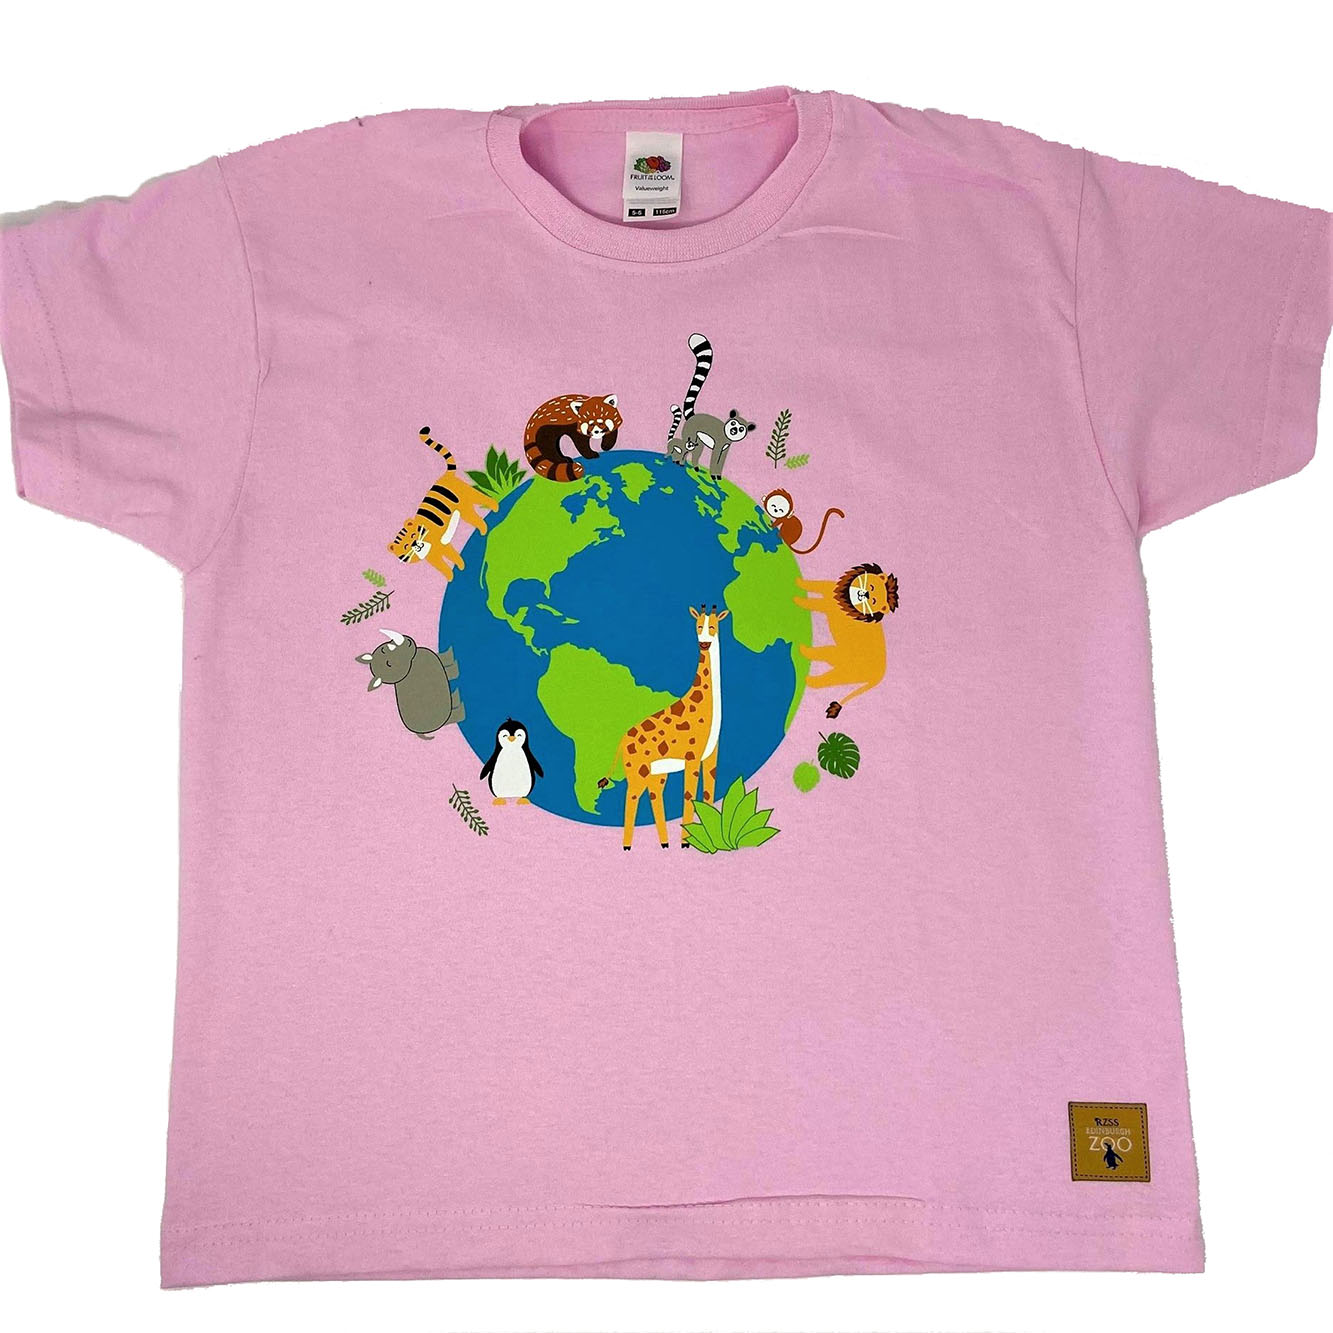 Bespoke Edinburgh Zoo design t-shirt featuring animals around the world.   Cotton t-shirt in pink colour. Comes with wo